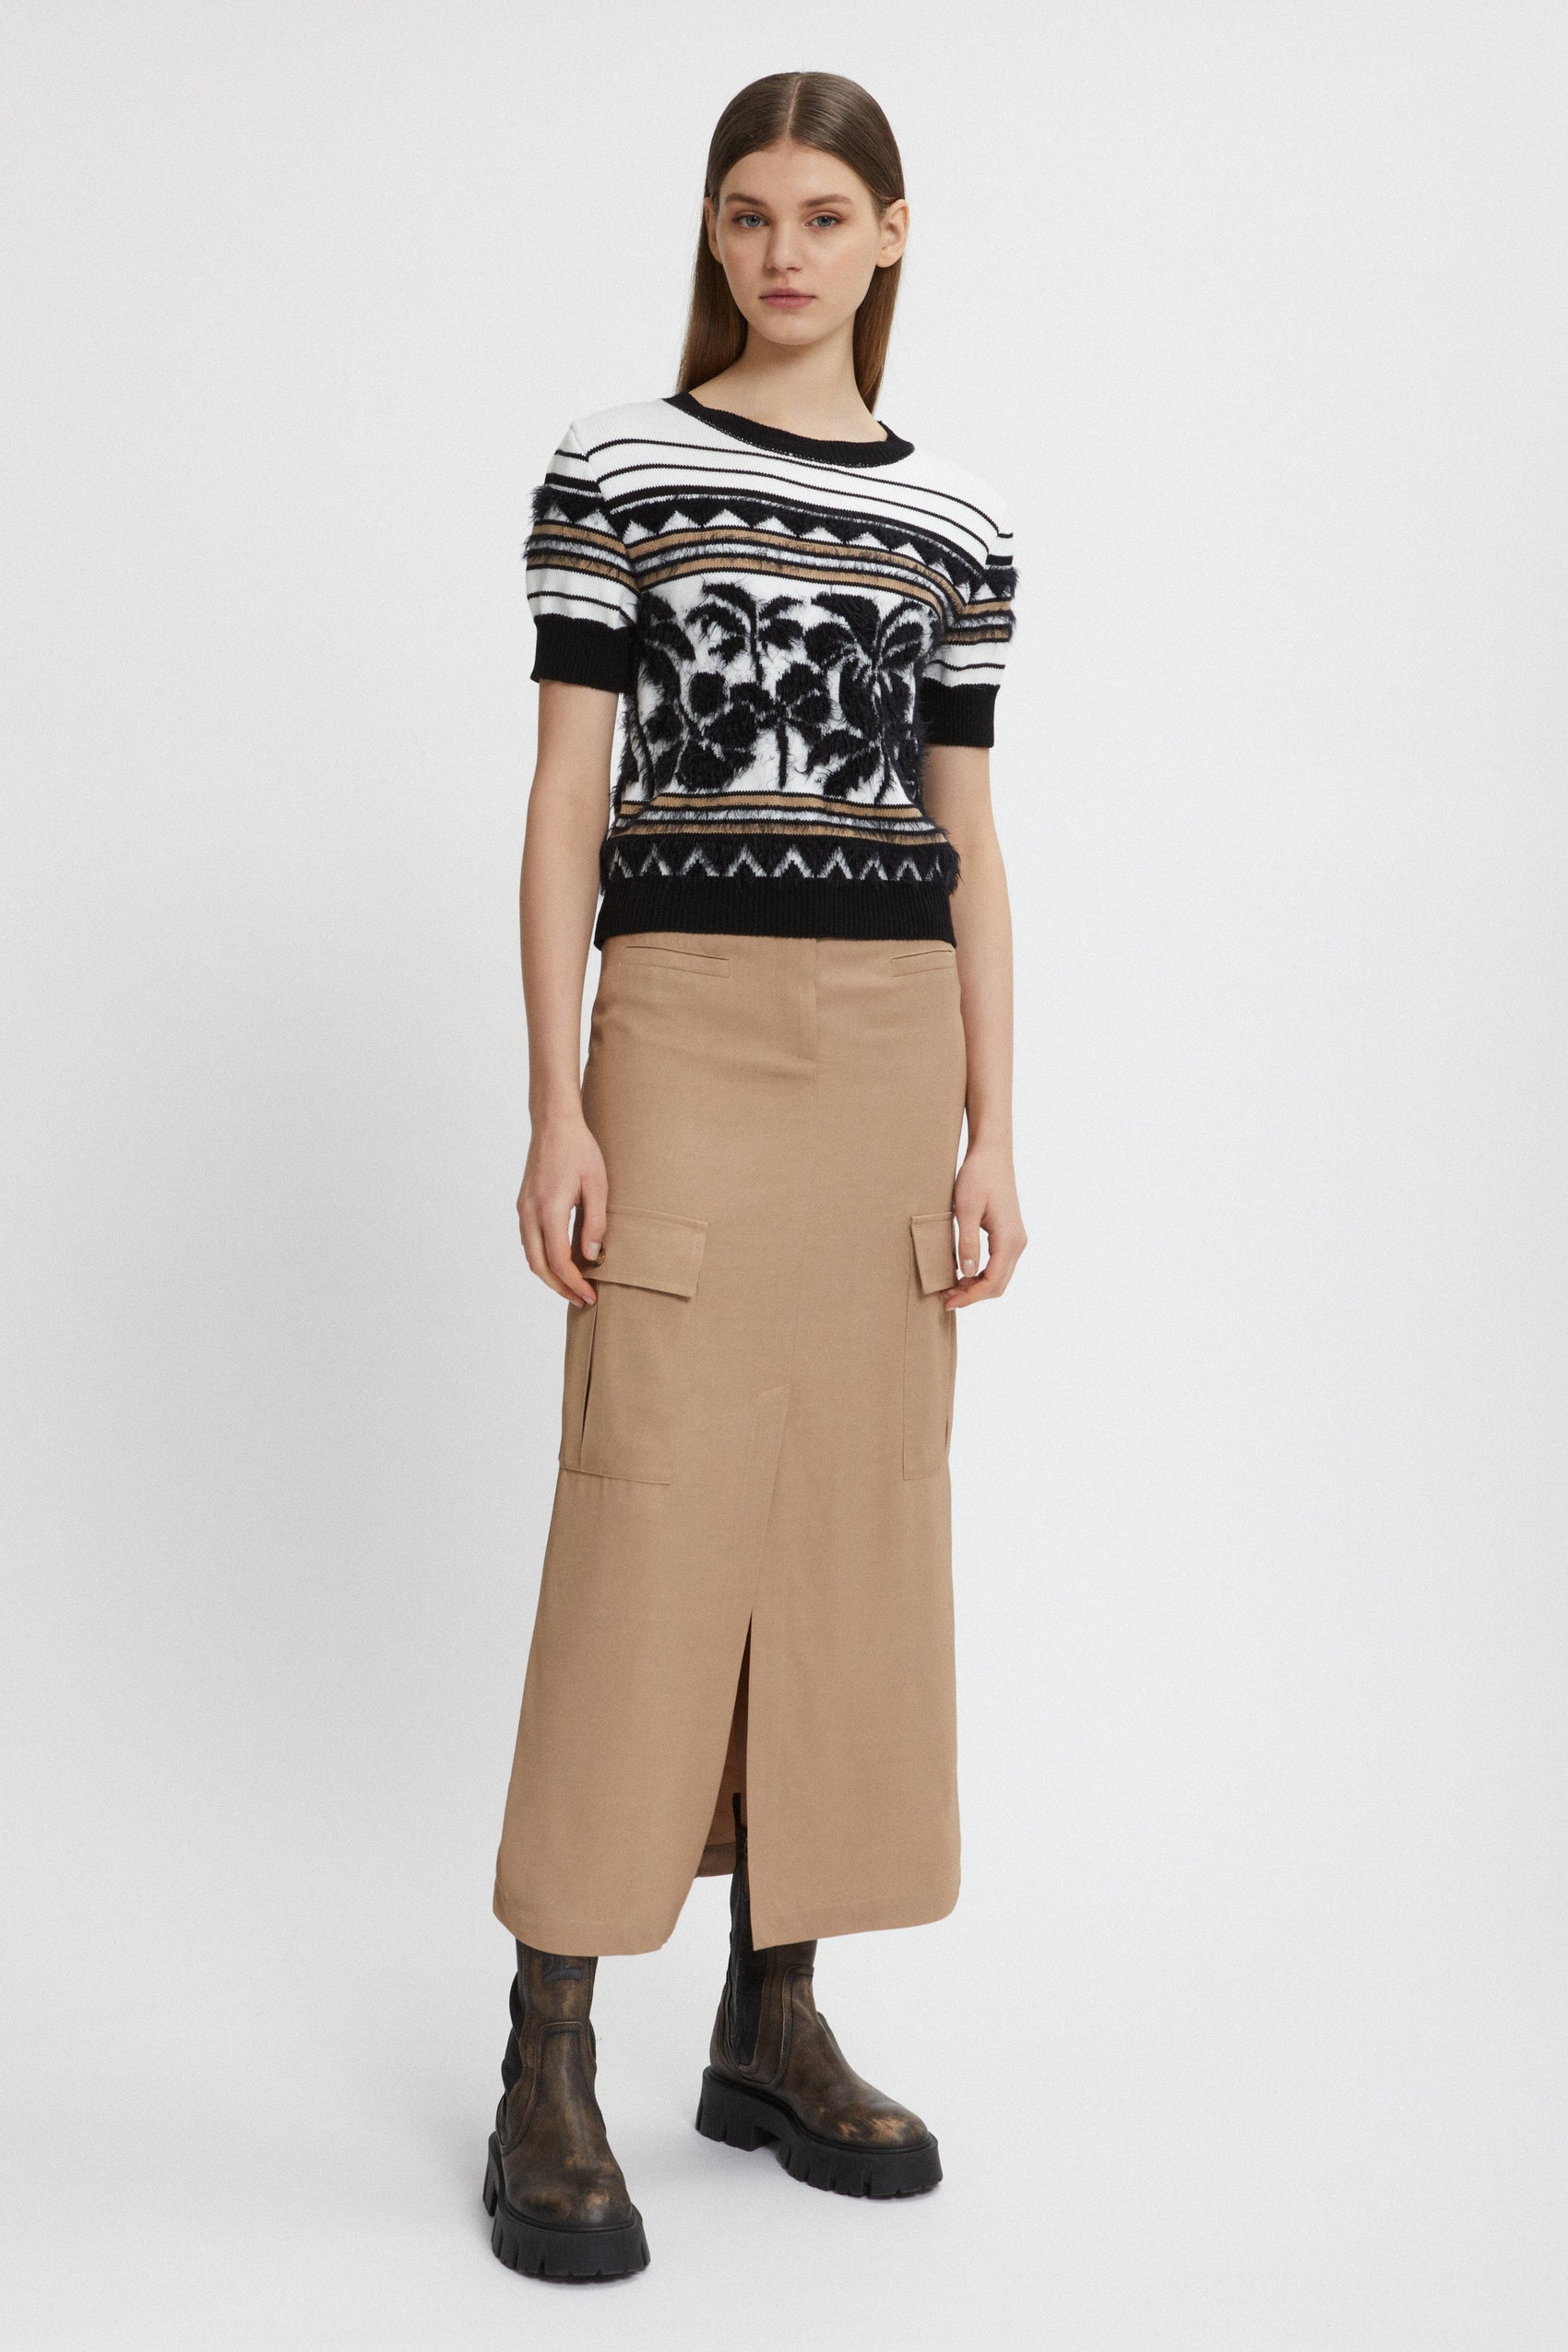 CARGO SKIRT WITH VENT